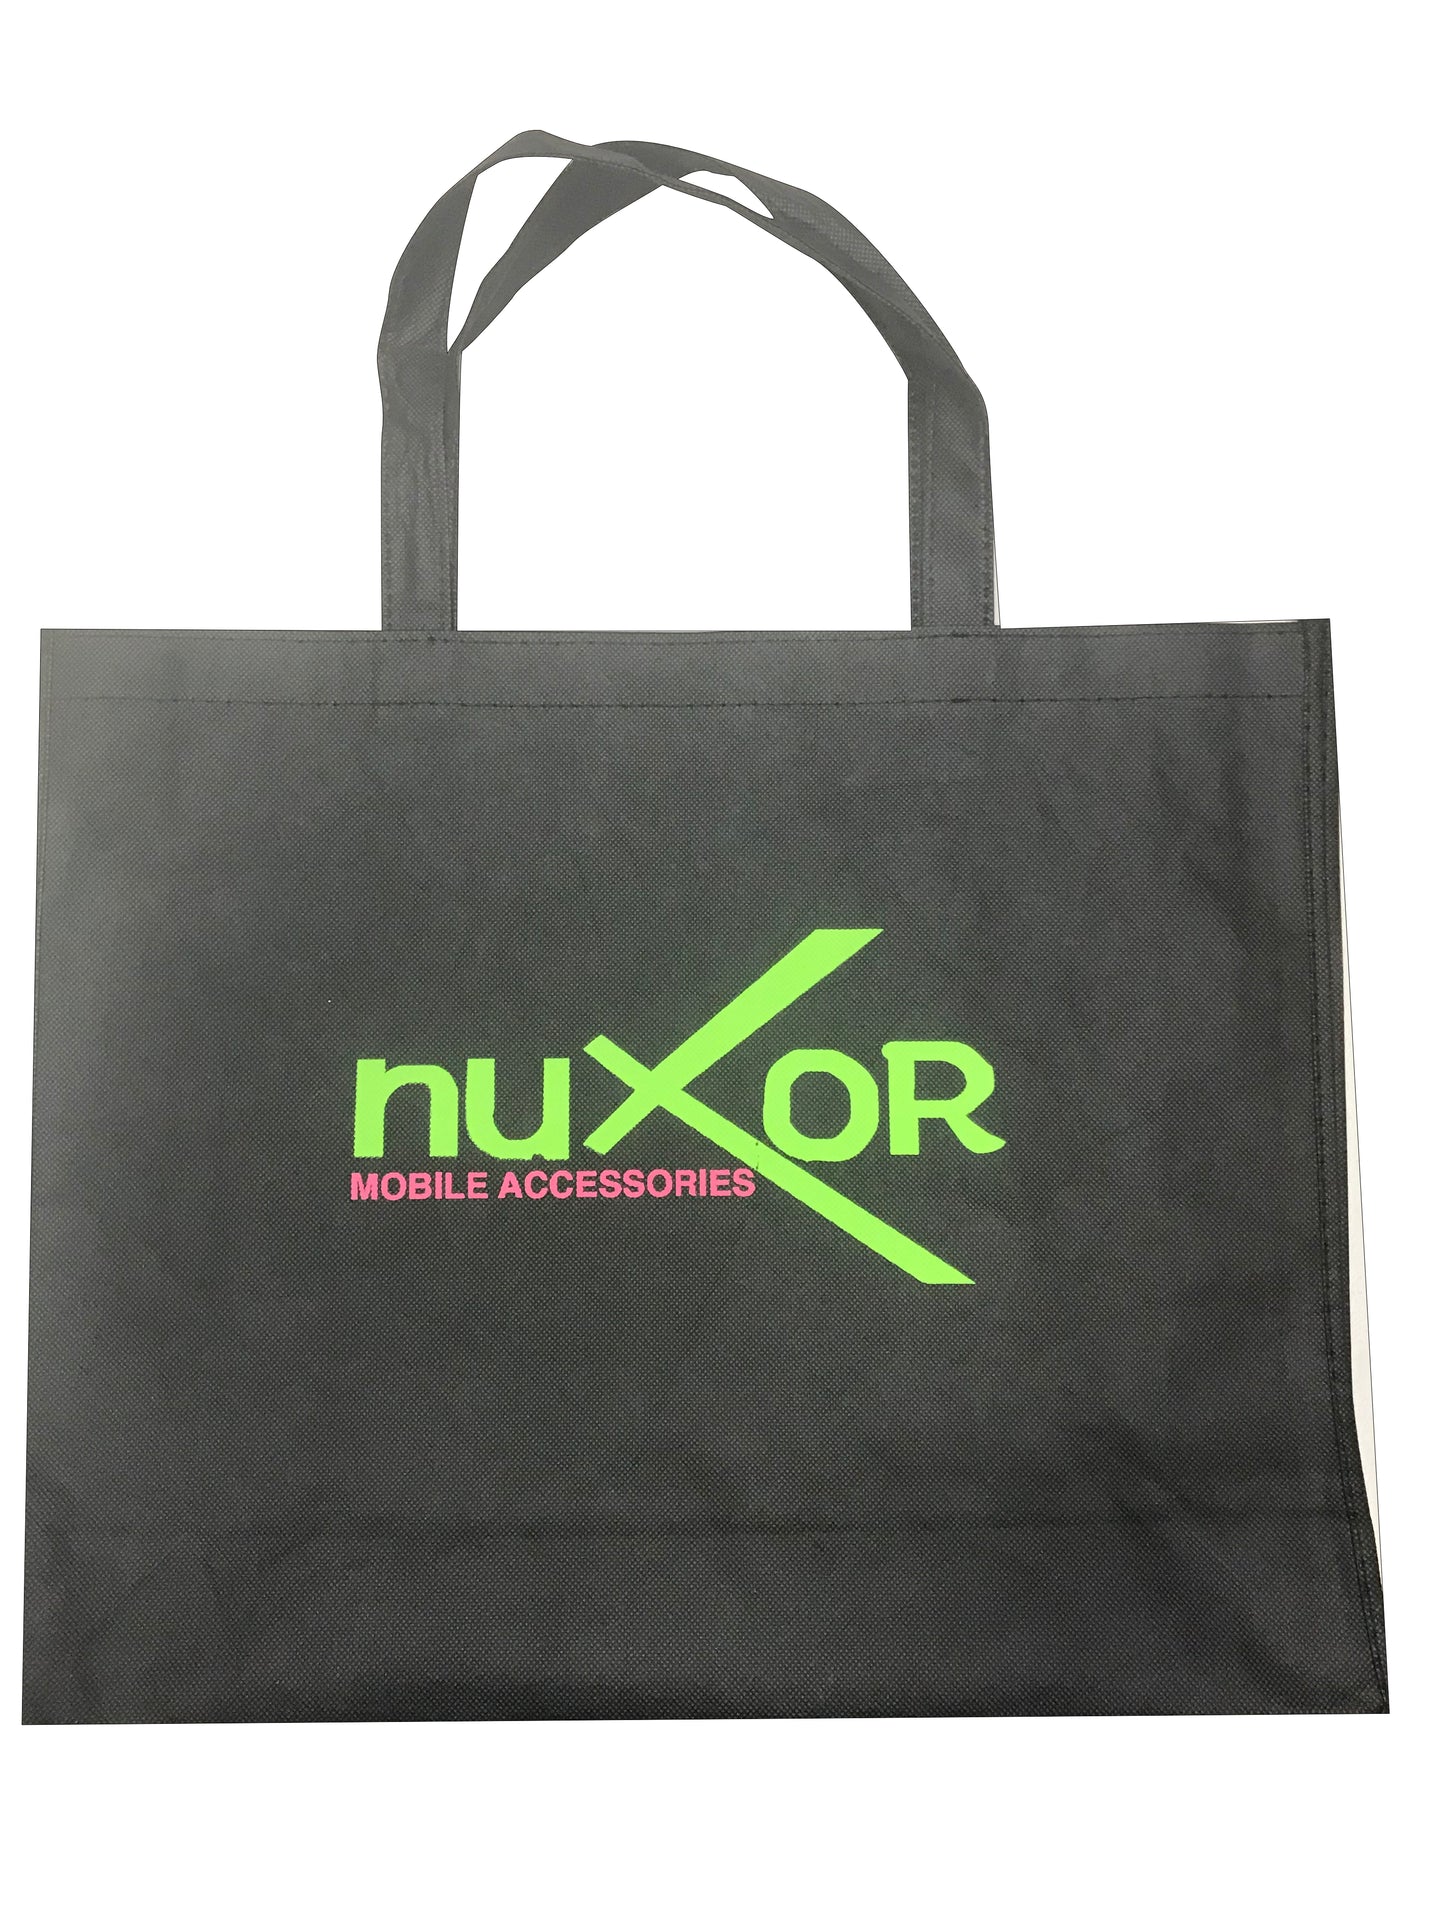 SHOPING BAGS 1000 PIECES WITH YOUR BRAND